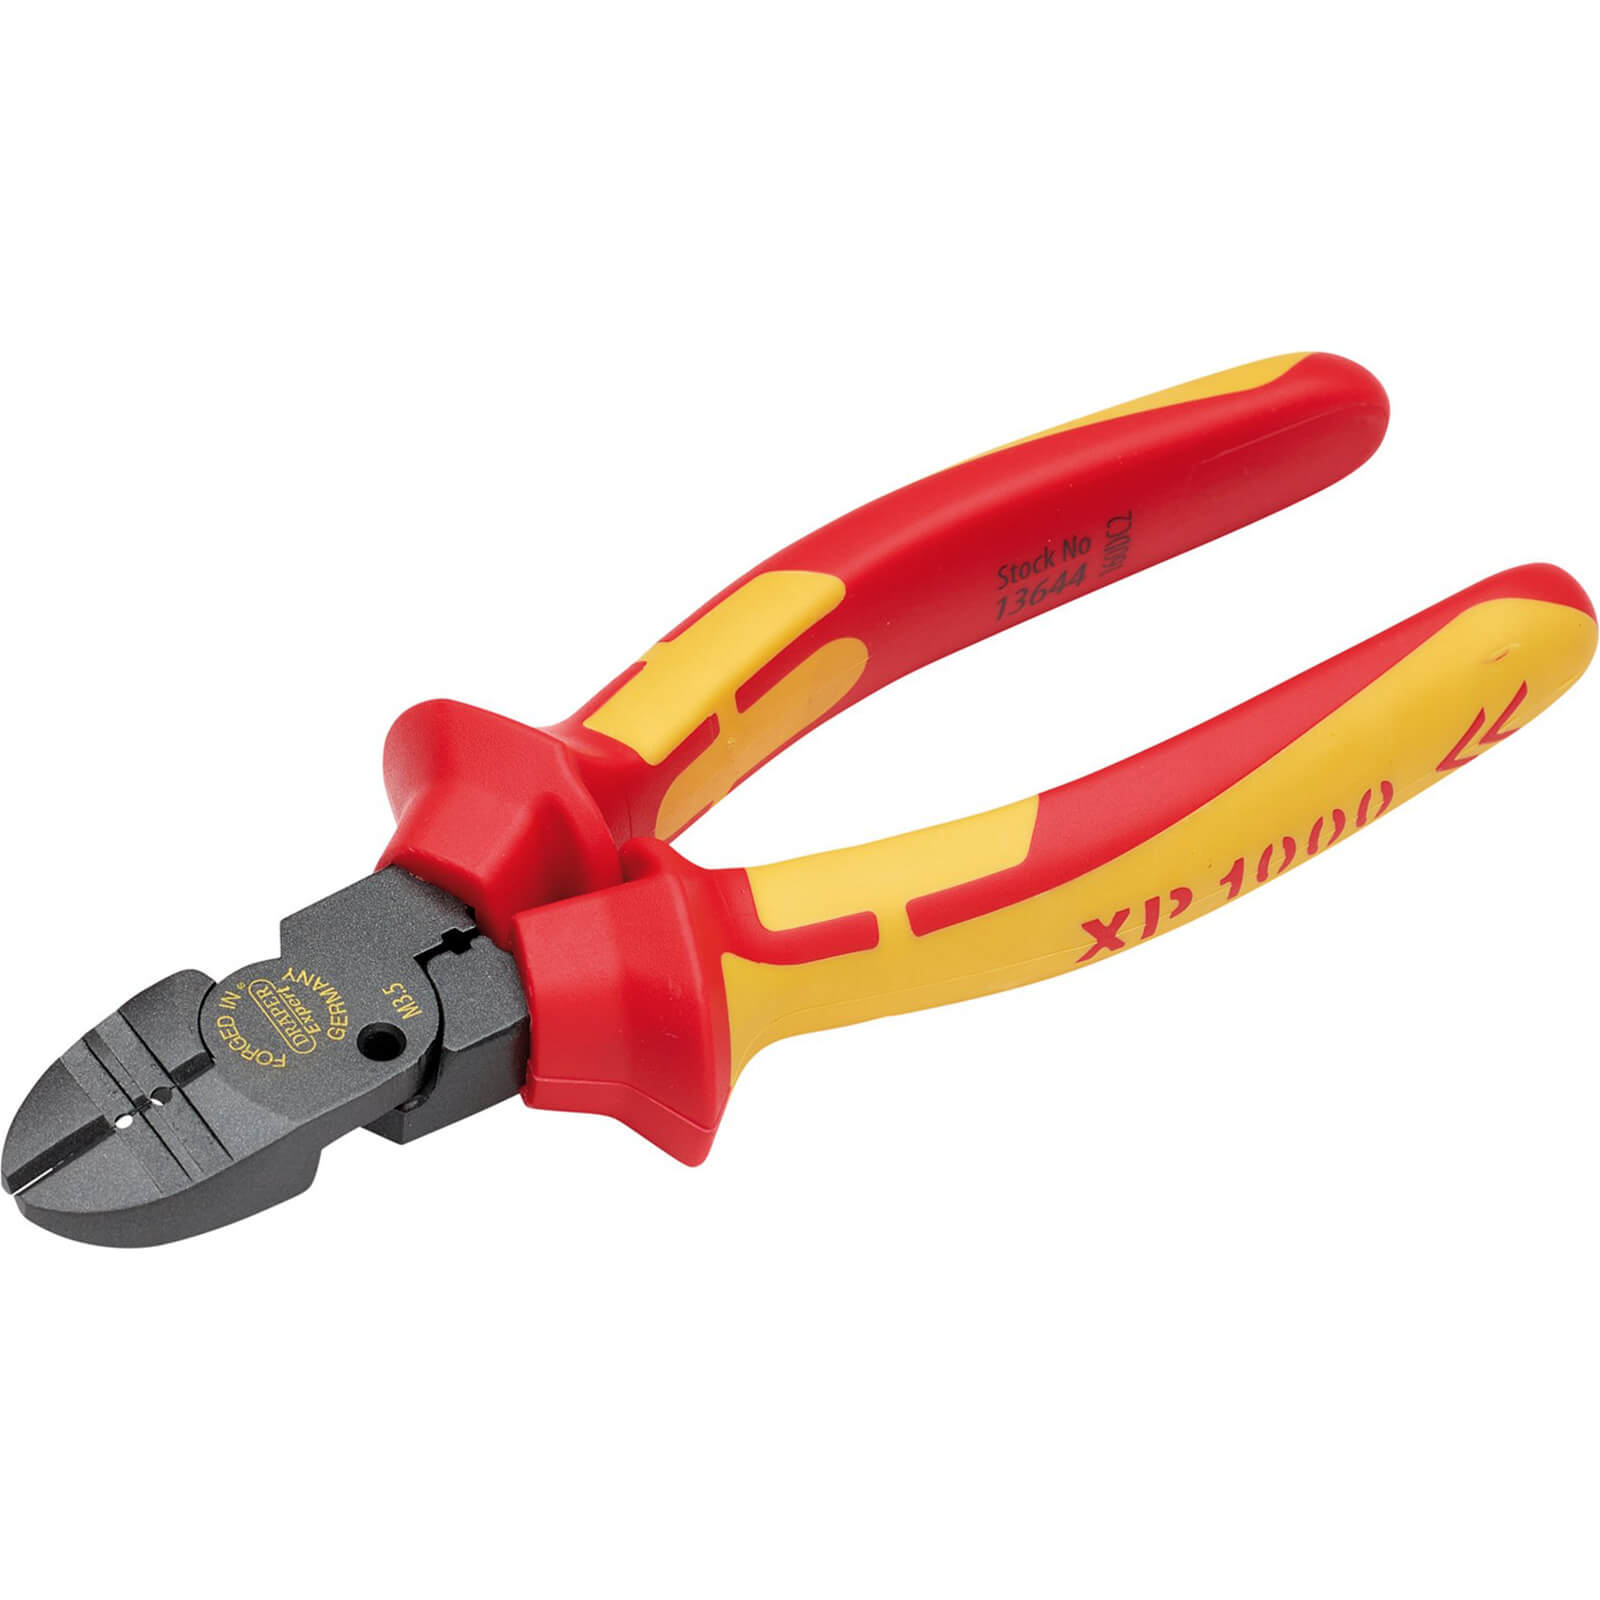 Image of Draper XP1000 VDE Insulated 4 in 1 Combination Cutter 160mm